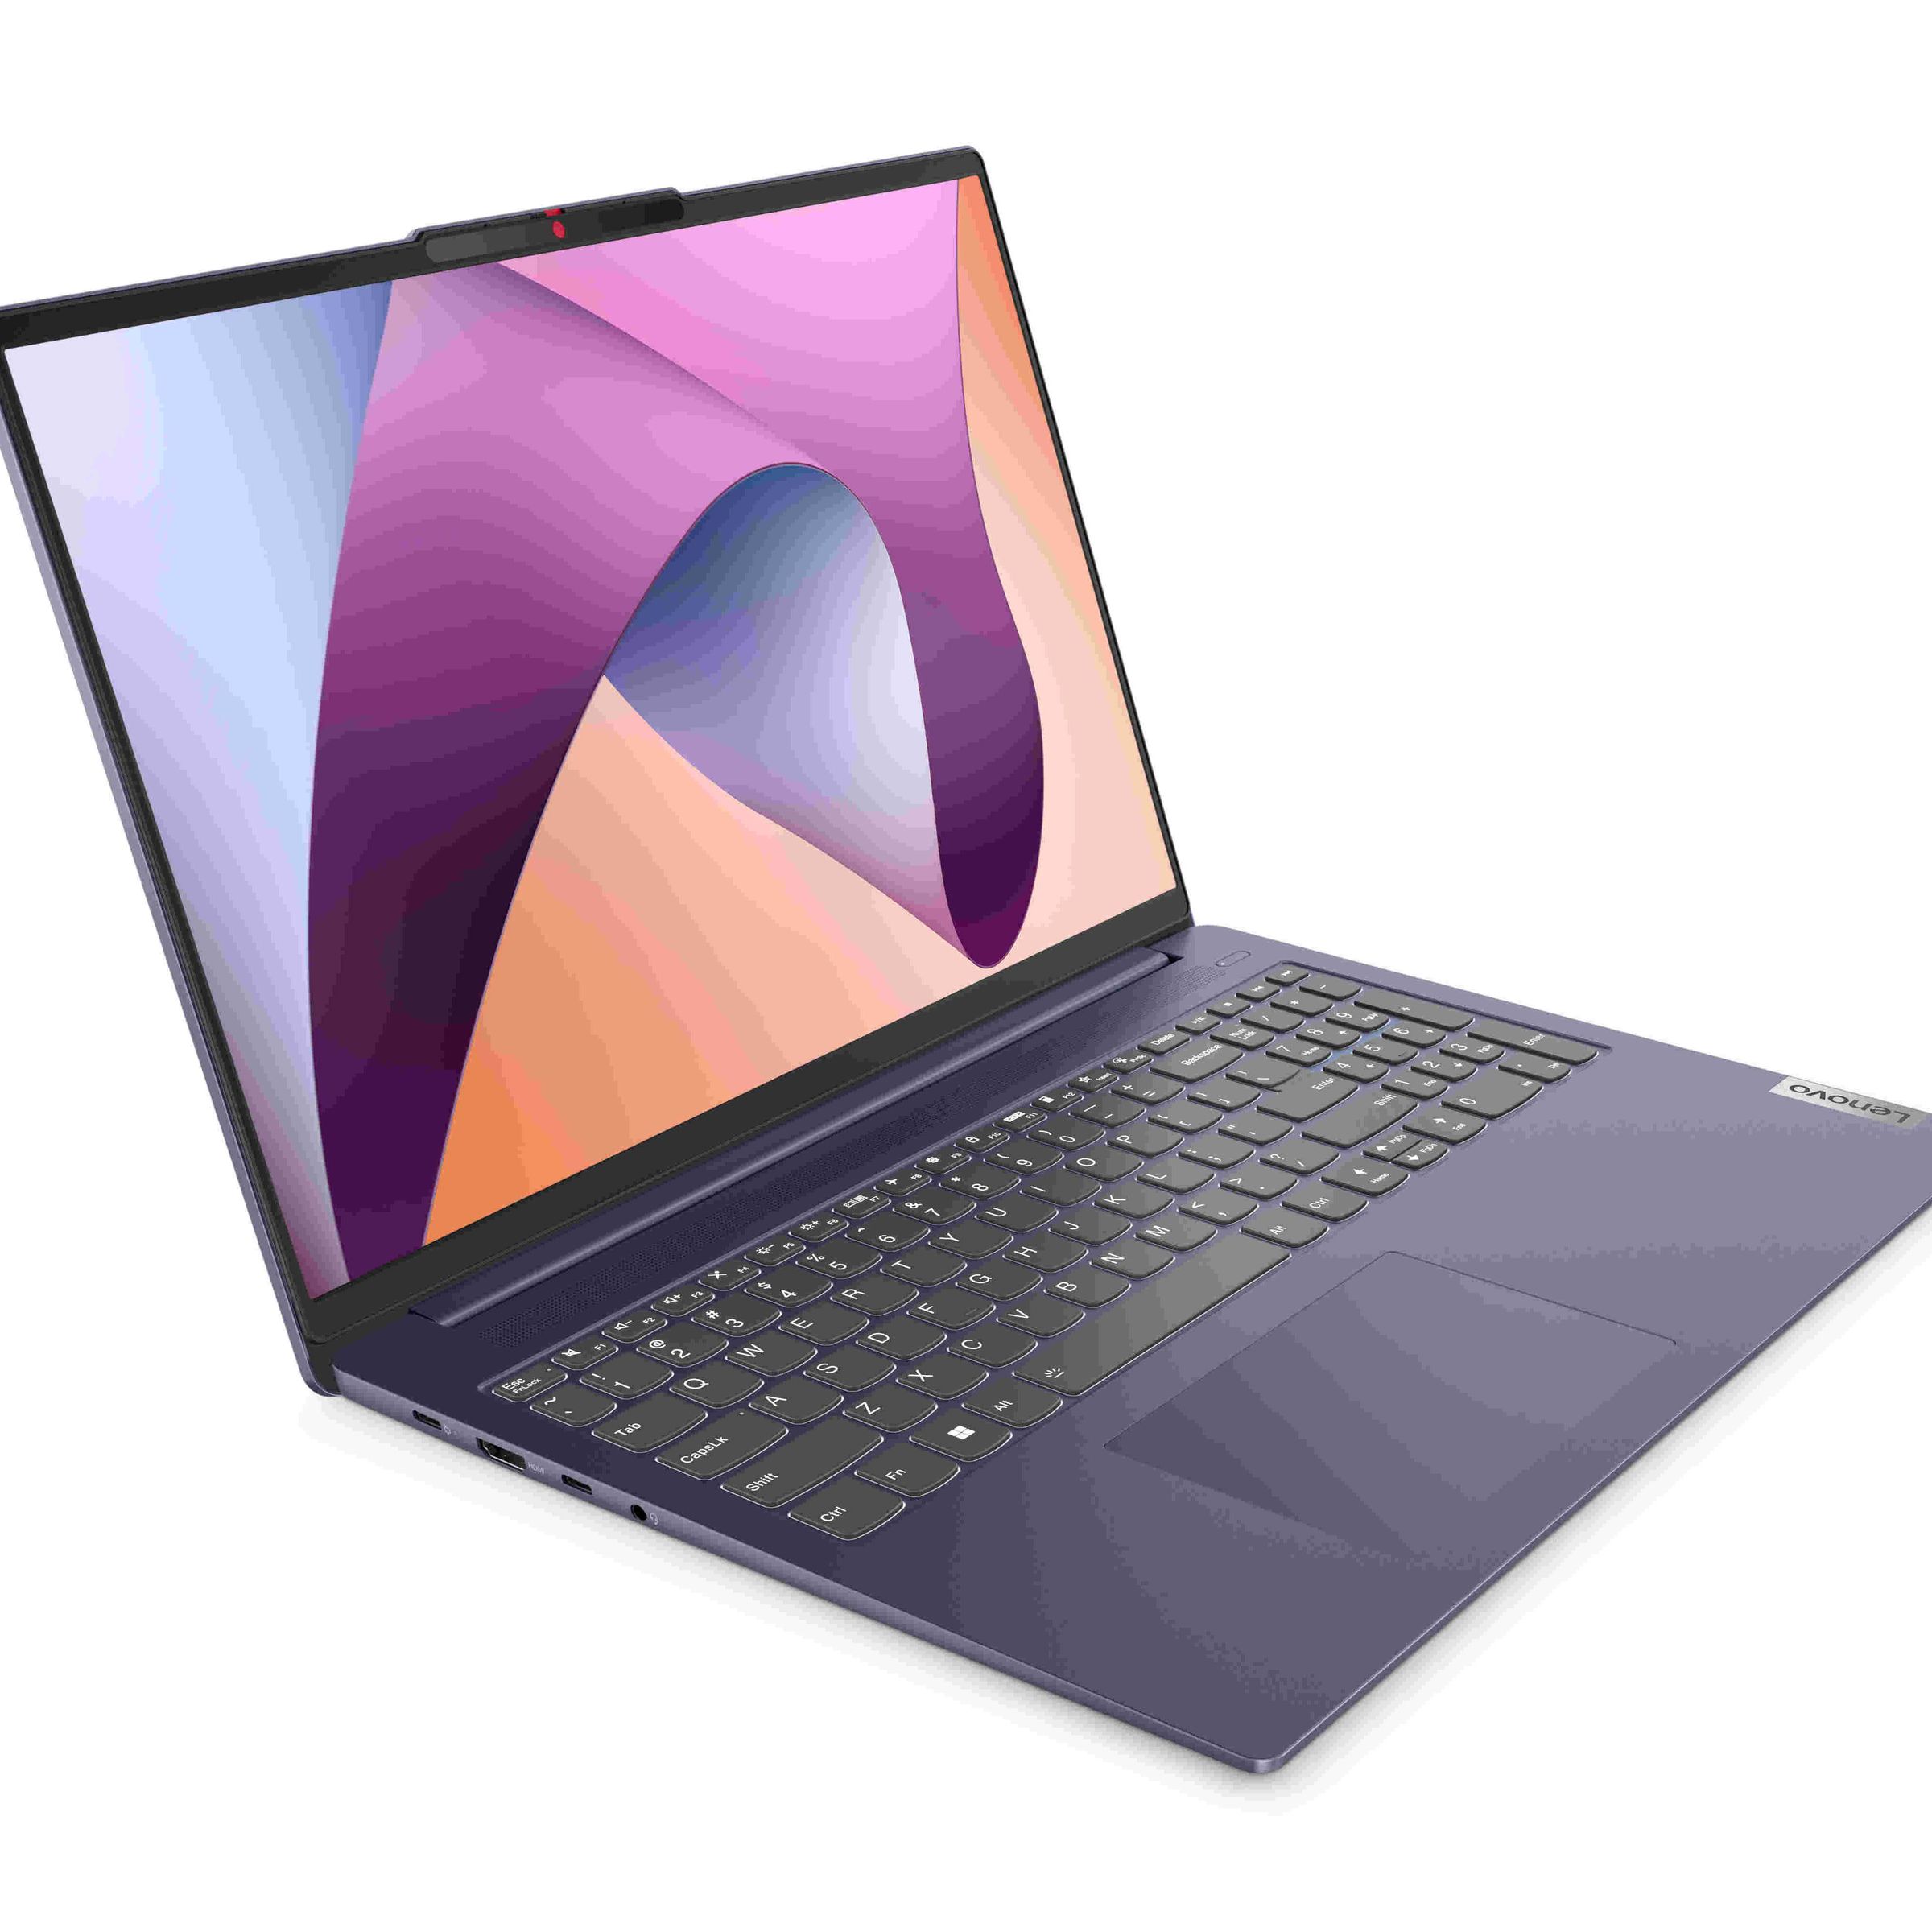 16-inch Lenovo IdeaPad Slim 5 shown from the front left.